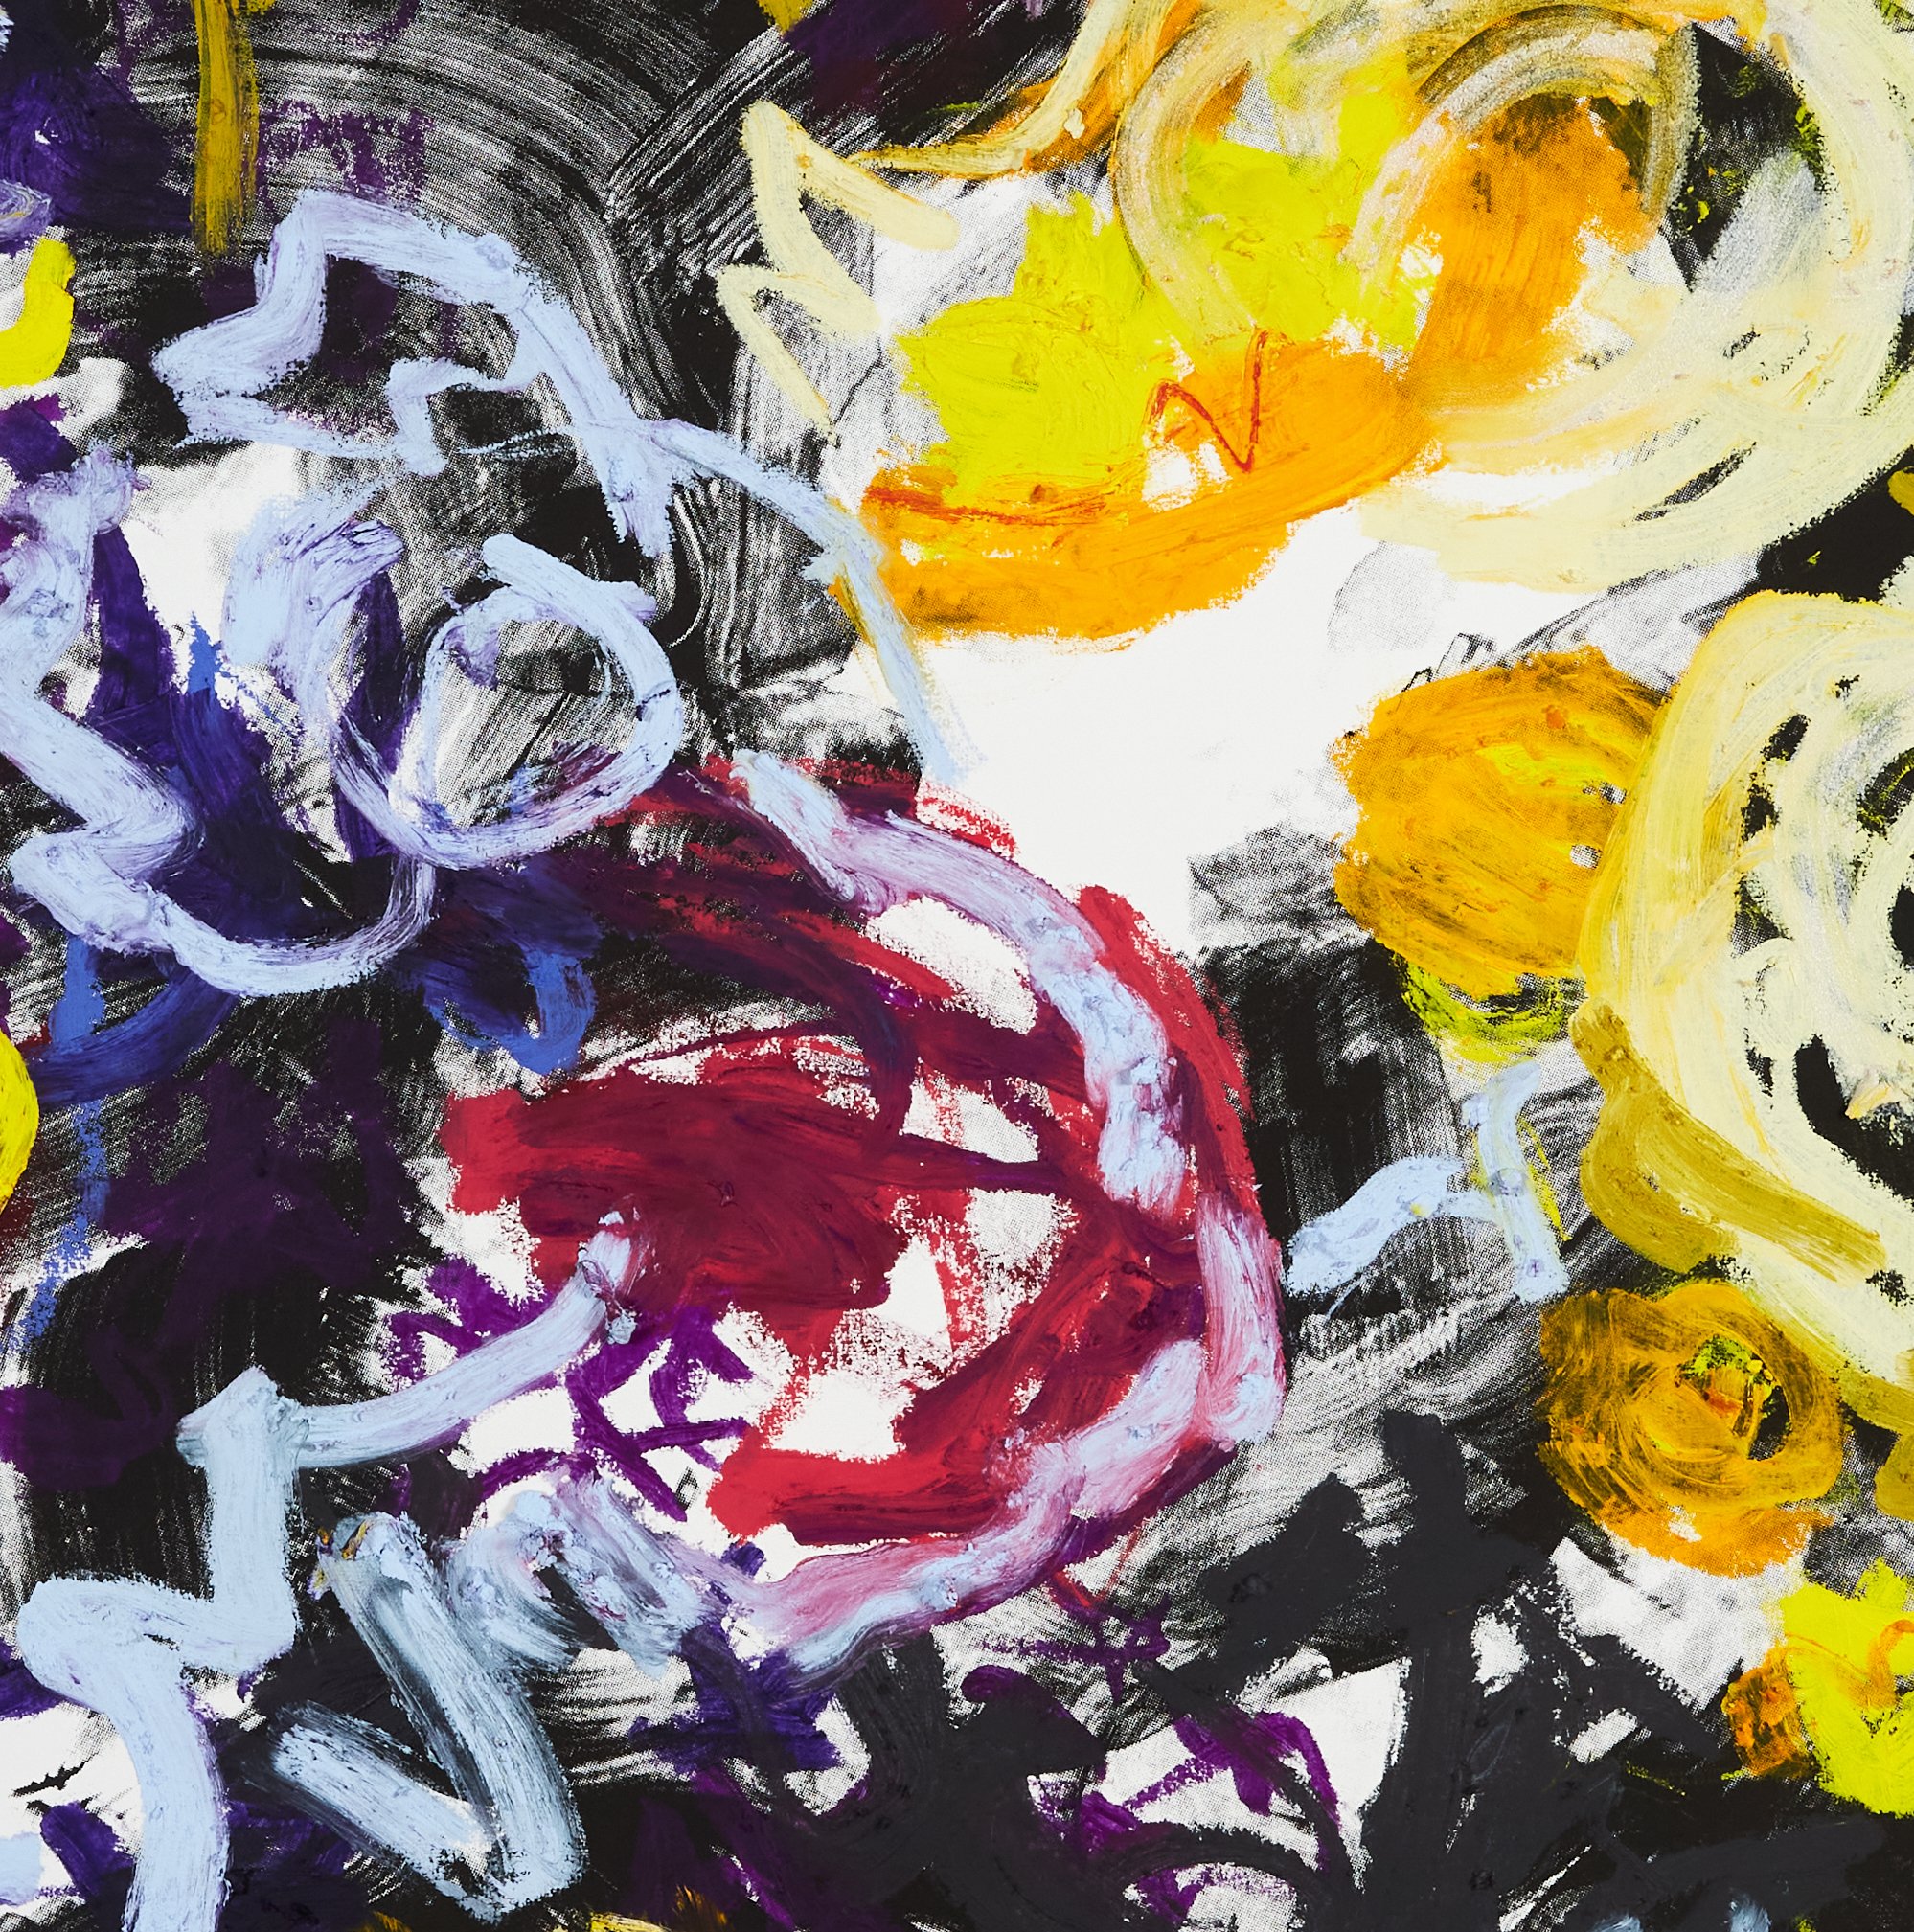  BECOMING SOMEONE ELSE: COMPLIMENTARY YELLOW AND PURPLE (MONOPRINT), 2023, Oil stick and paper monoprint (black), 40 x 30 inches, labeled “M.P.,” signed, and dated, unframed (DETAIL)